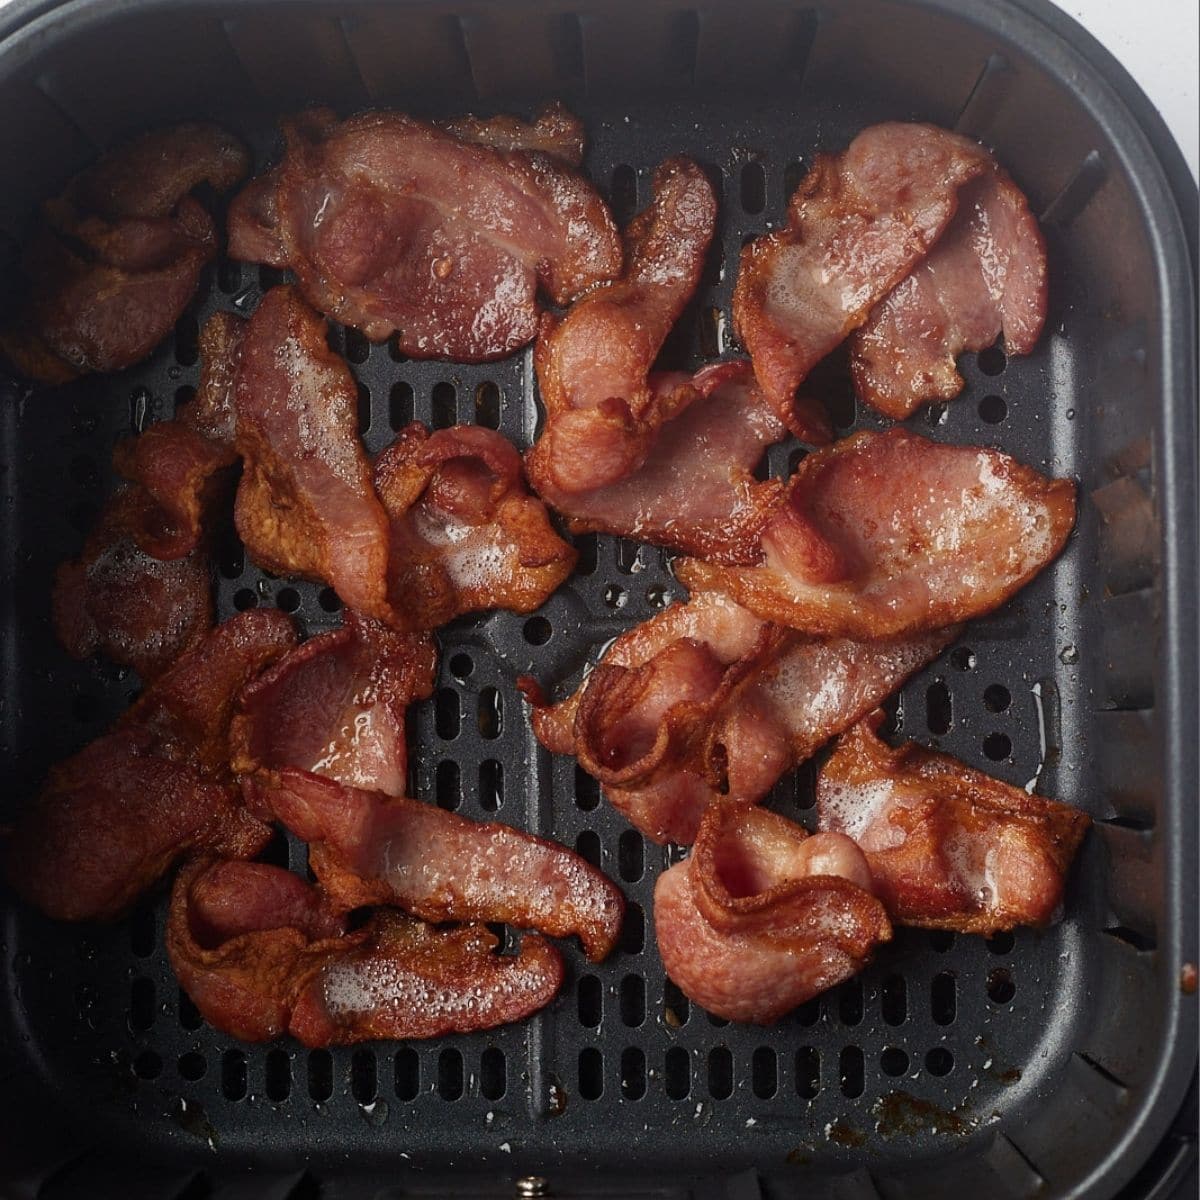 Air Fryer Bacon - Big Bear's Wife - How to make Air Fryer Bacon